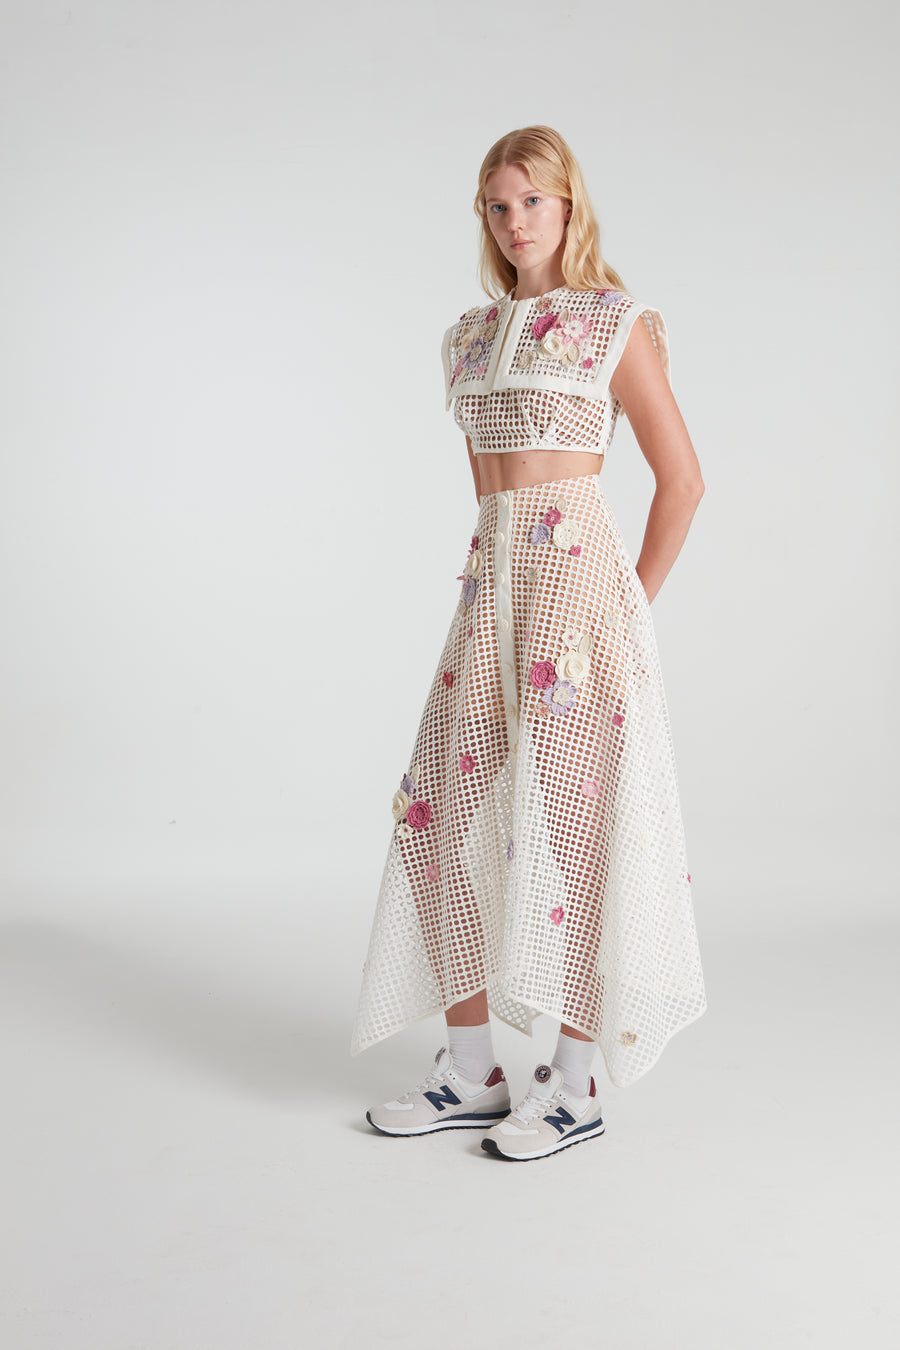 White stenciled skirt decorated with knitted flowers.